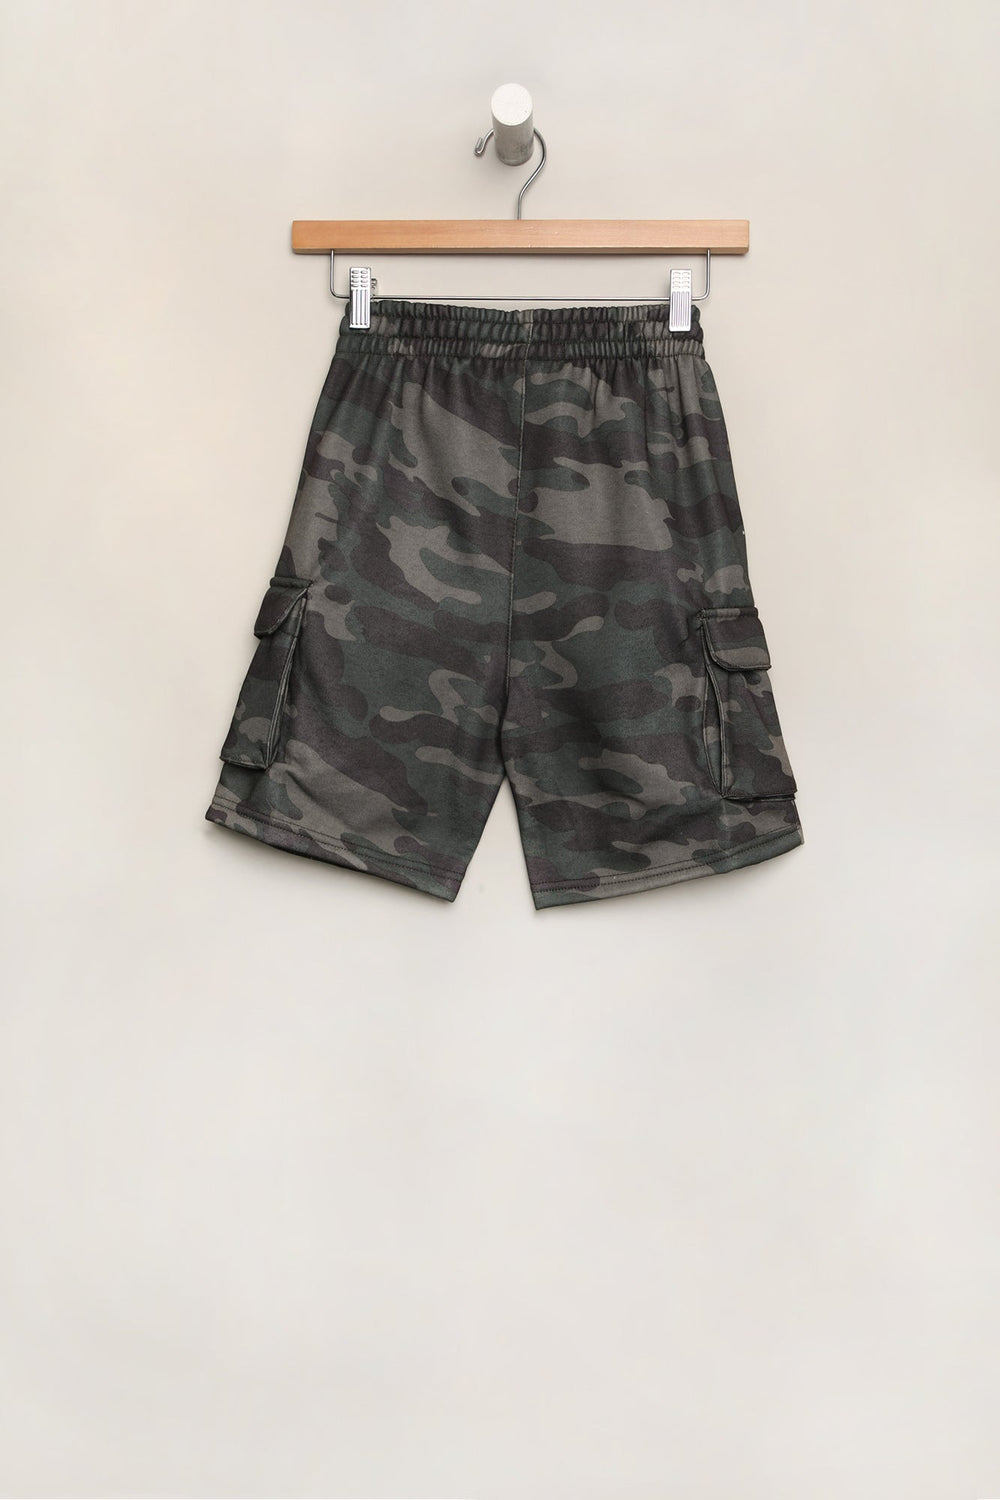 West49 Youth Camo Fleece Cargo Shorts West49 Youth Camo Fleece Cargo Shorts